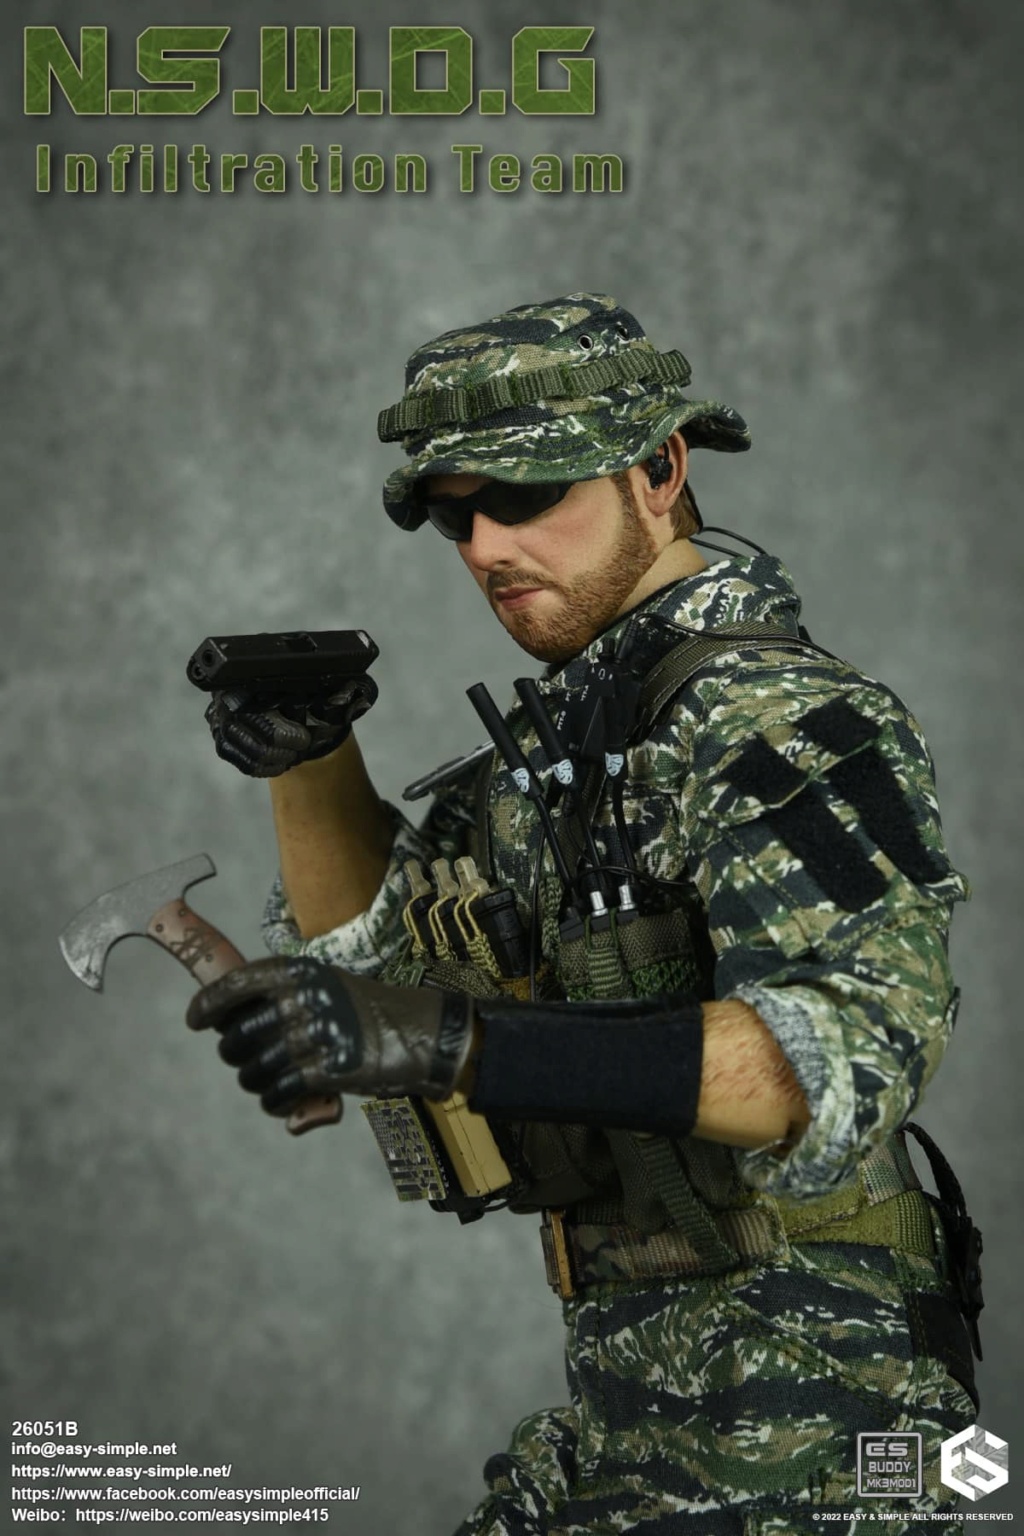 InfilitrationTeam - NEW PRODUCT: EASY AND SIMPLE 1/6 SCALE FIGURE: N.S.W.D.G INFILTRATION TEAM - (2 Versions) 11857